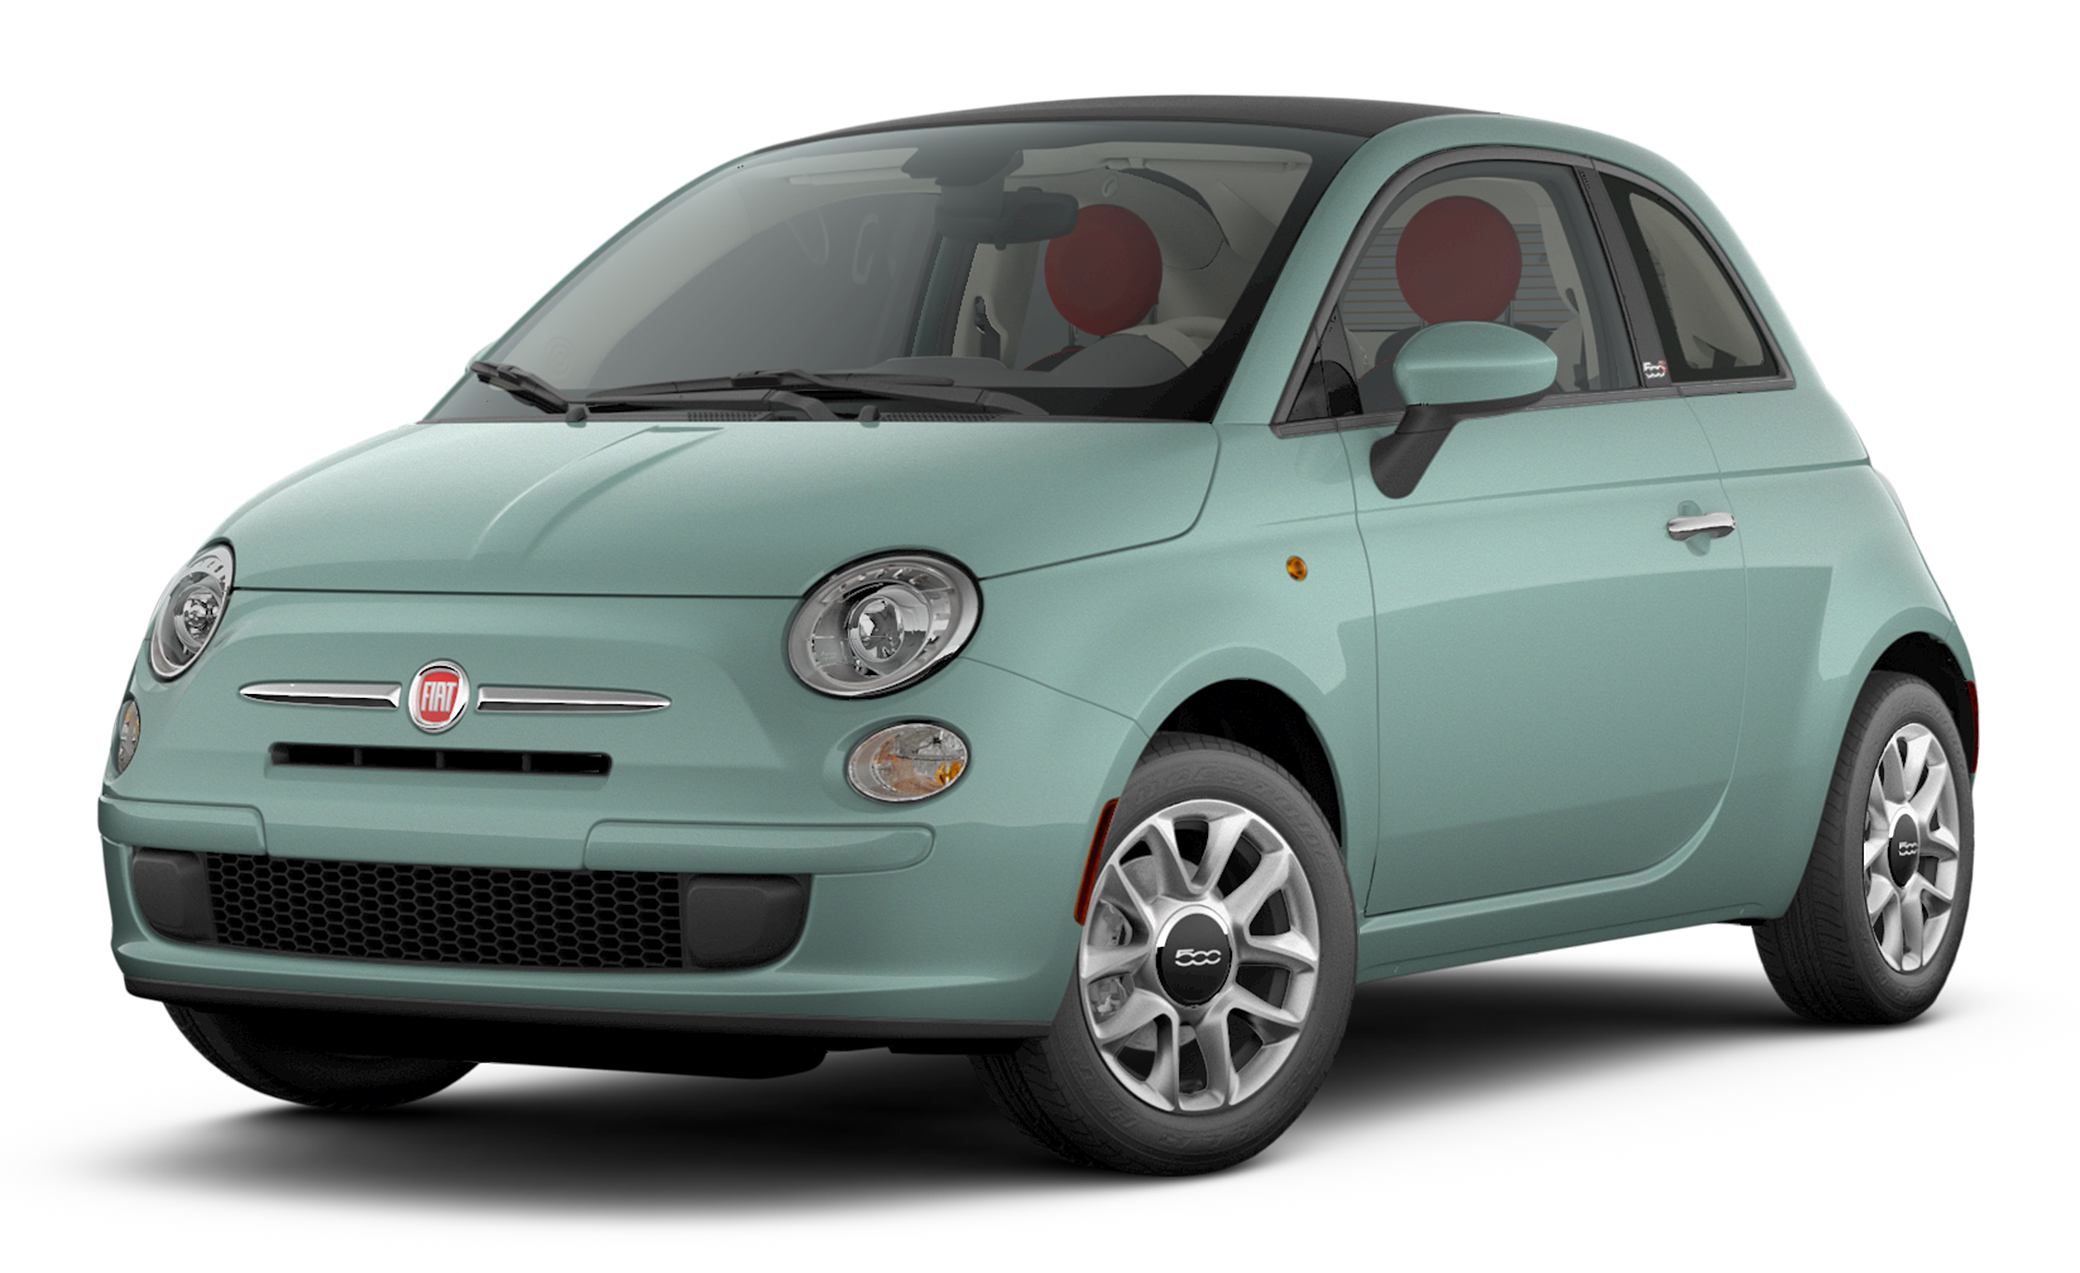 2017 FIAT 500c Incentives, Specials & Offers in Helena MT